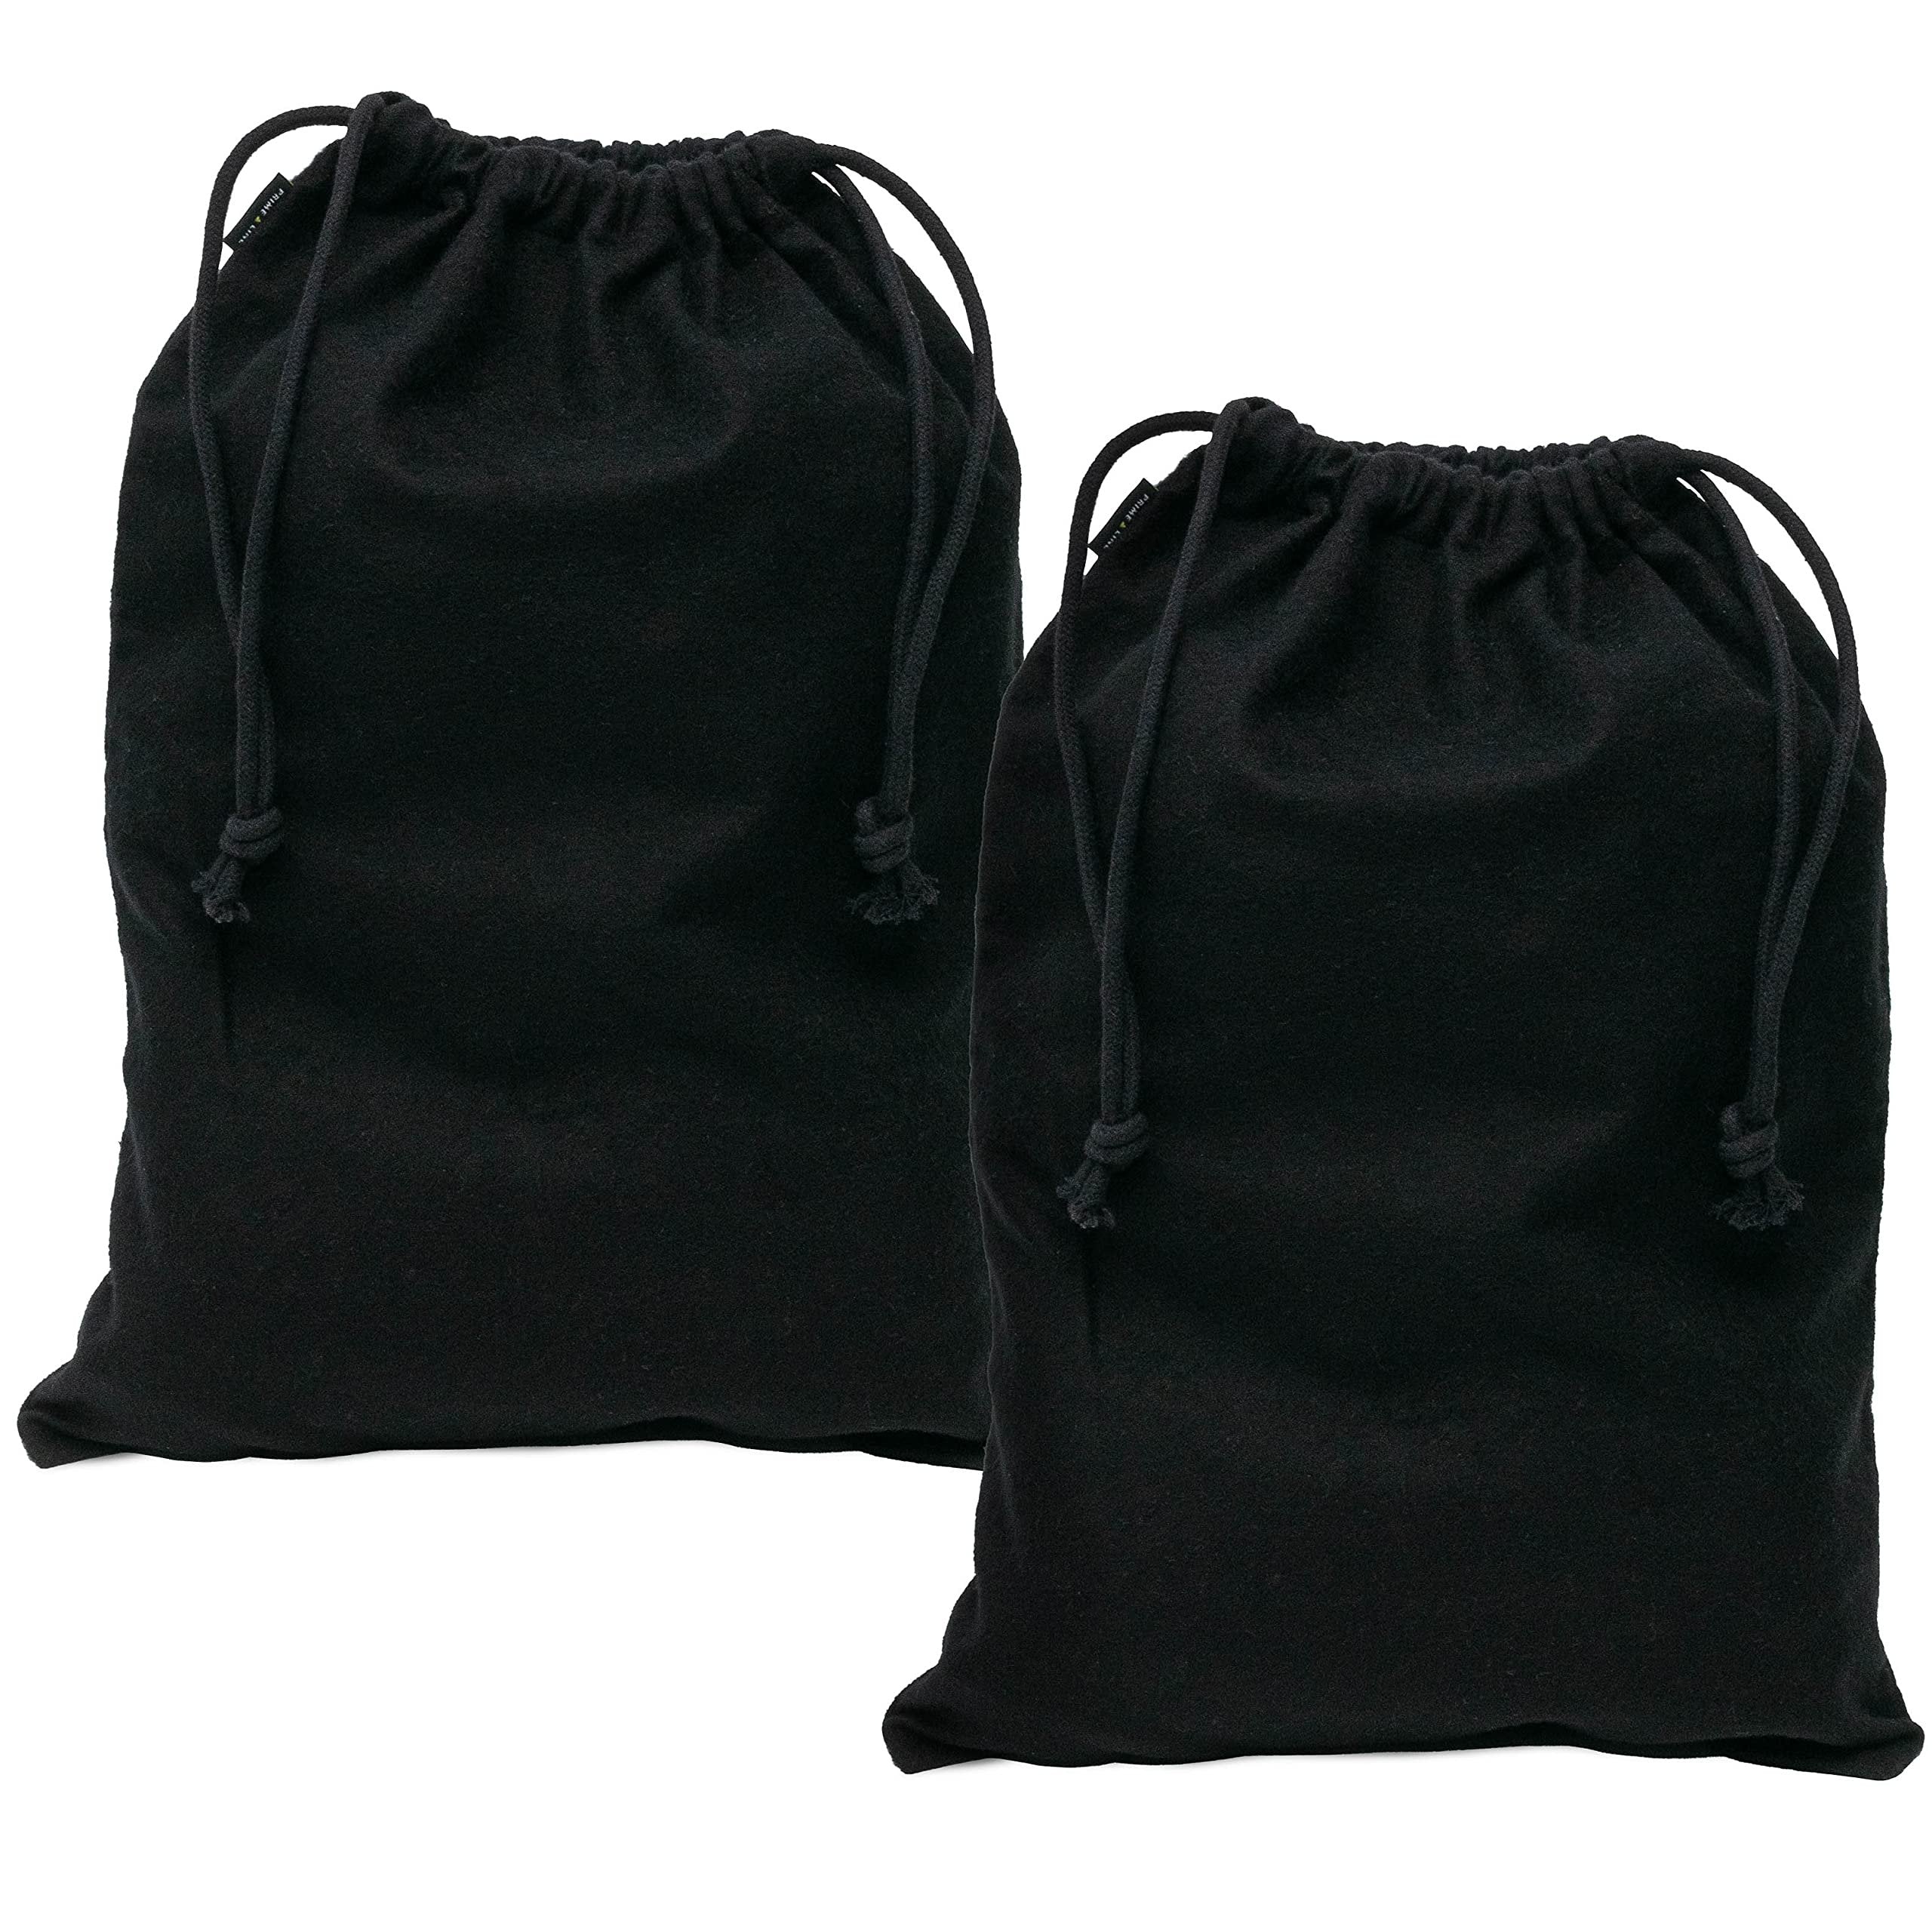 Black Shoe Dust Bags - Pack of 2 (12x17 Inch) | Flannel Pouch with Drawstring Closure for Travel, Home, Storage & Accessories